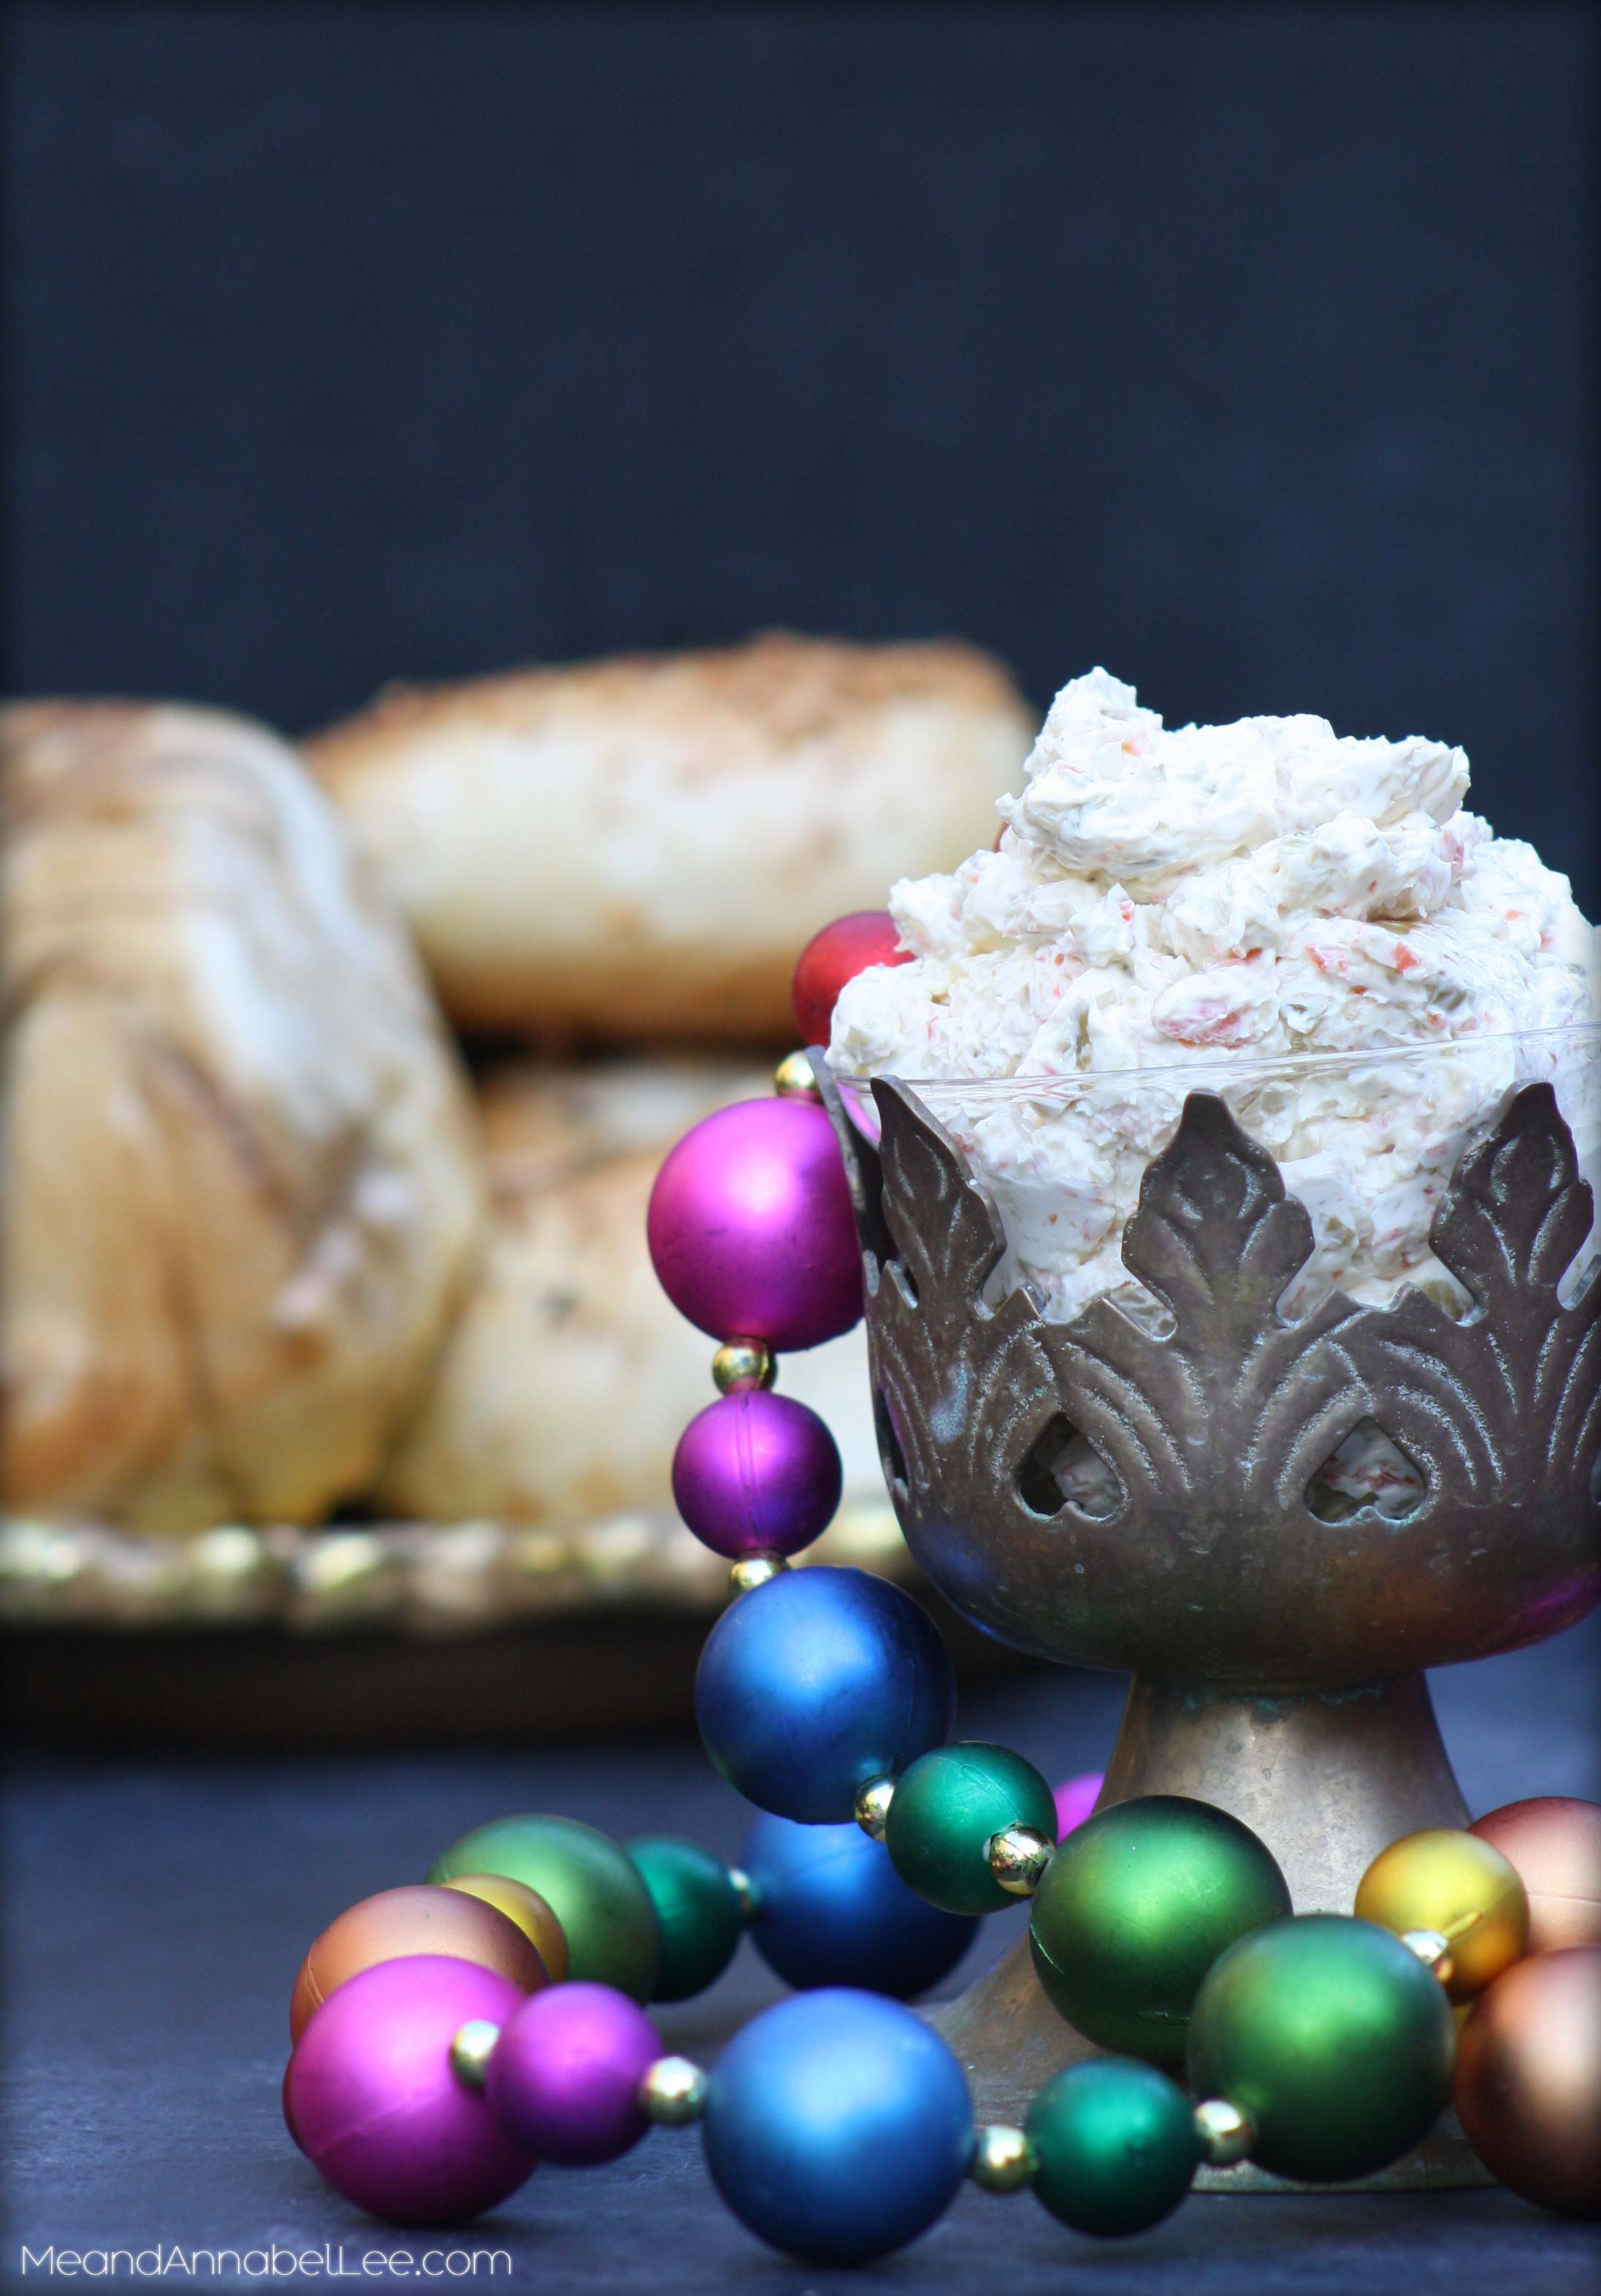 Muffuletta Cream Cheese Spread - Adding a touch of New Orleans to your Breakfast - Mardi Gras Brunch - www.meandannabellee.com